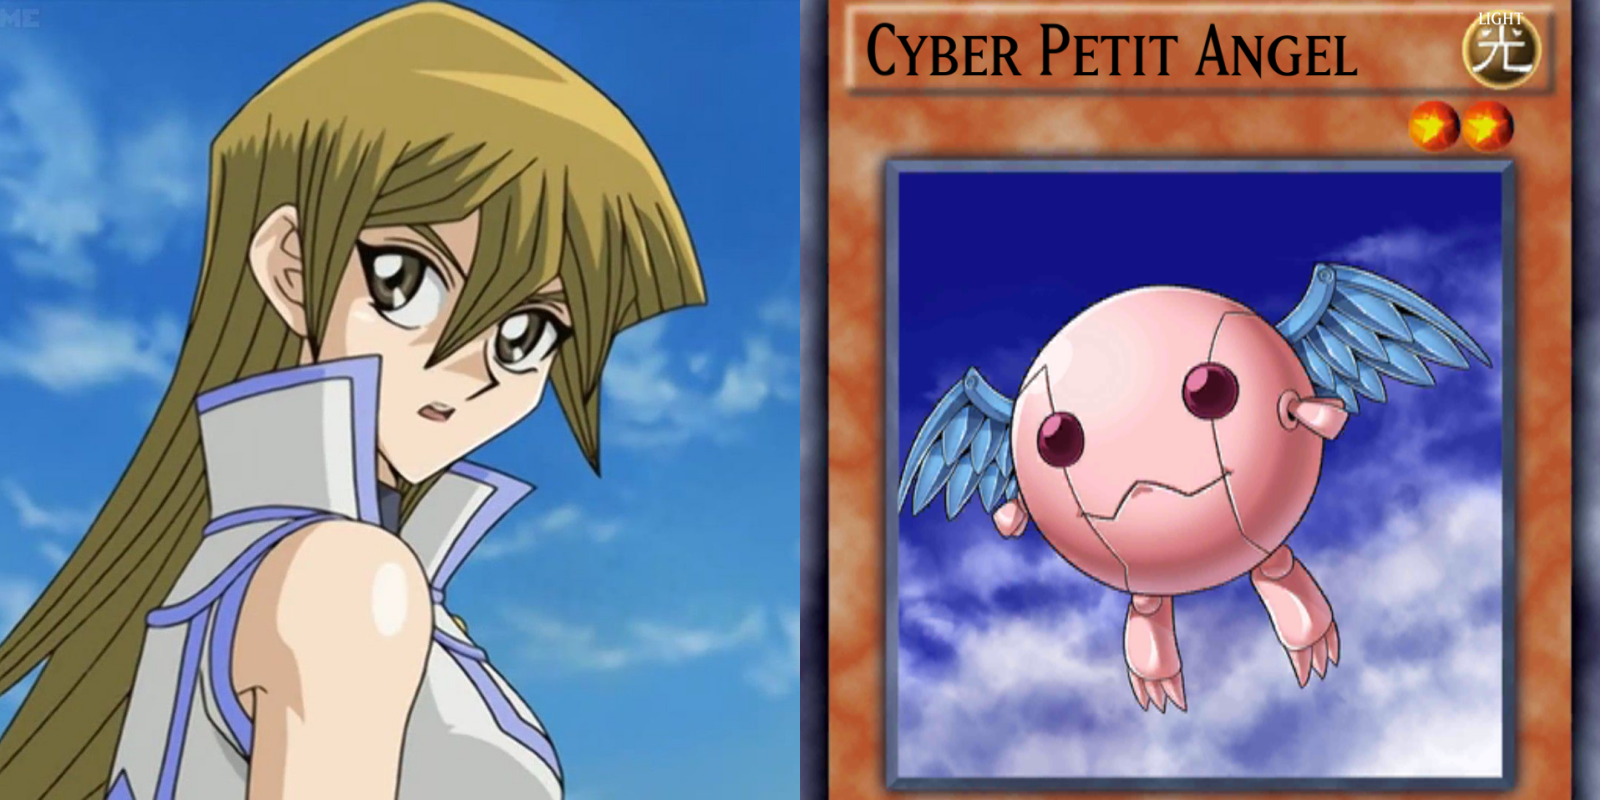 A collage of Cyber Petit Angel and Alexis Rhodes